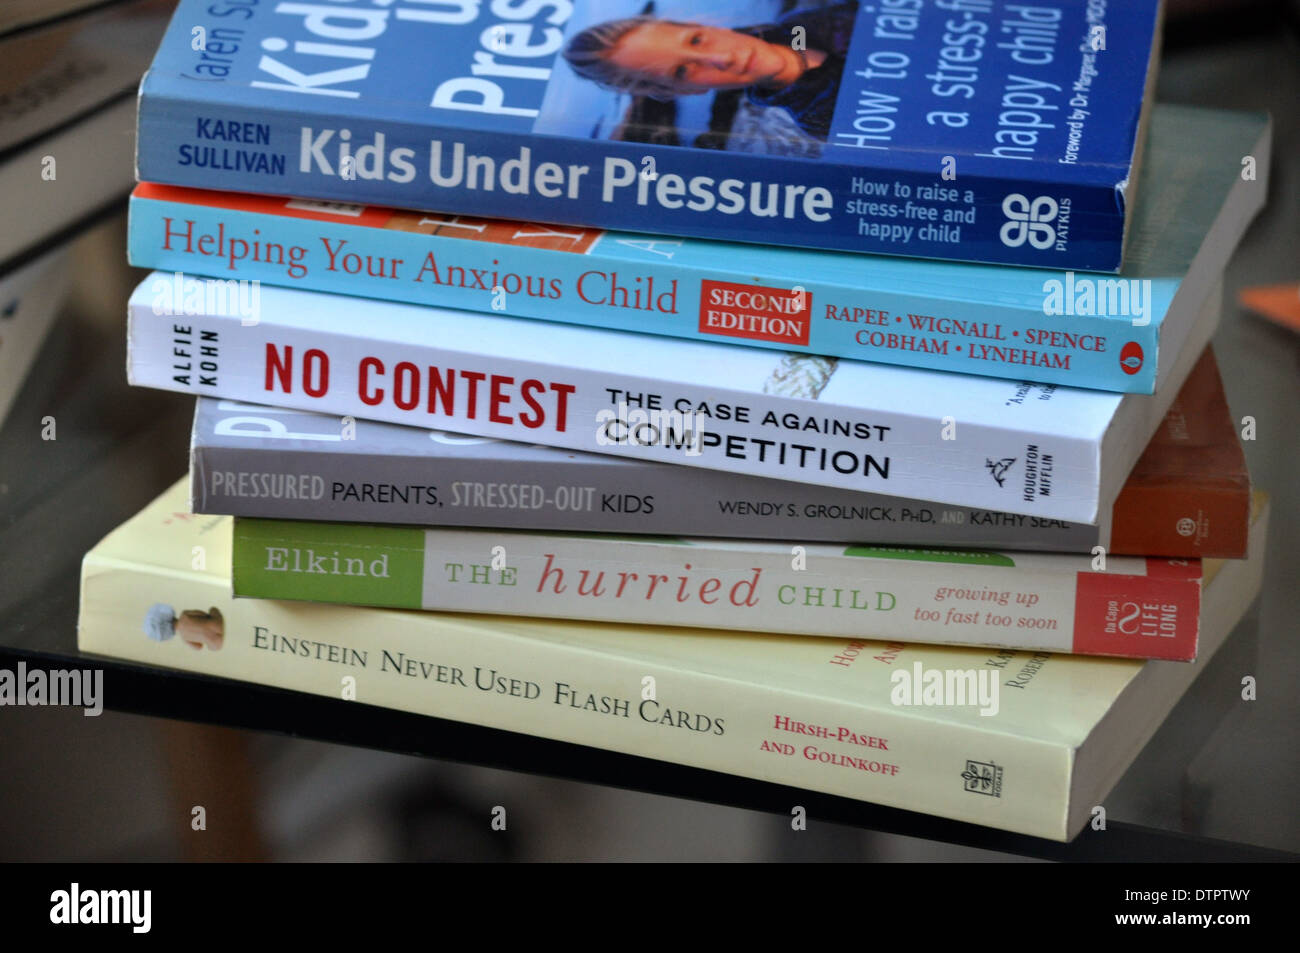 books about the pressure on children and anxious children in a competitive world Stock Photo